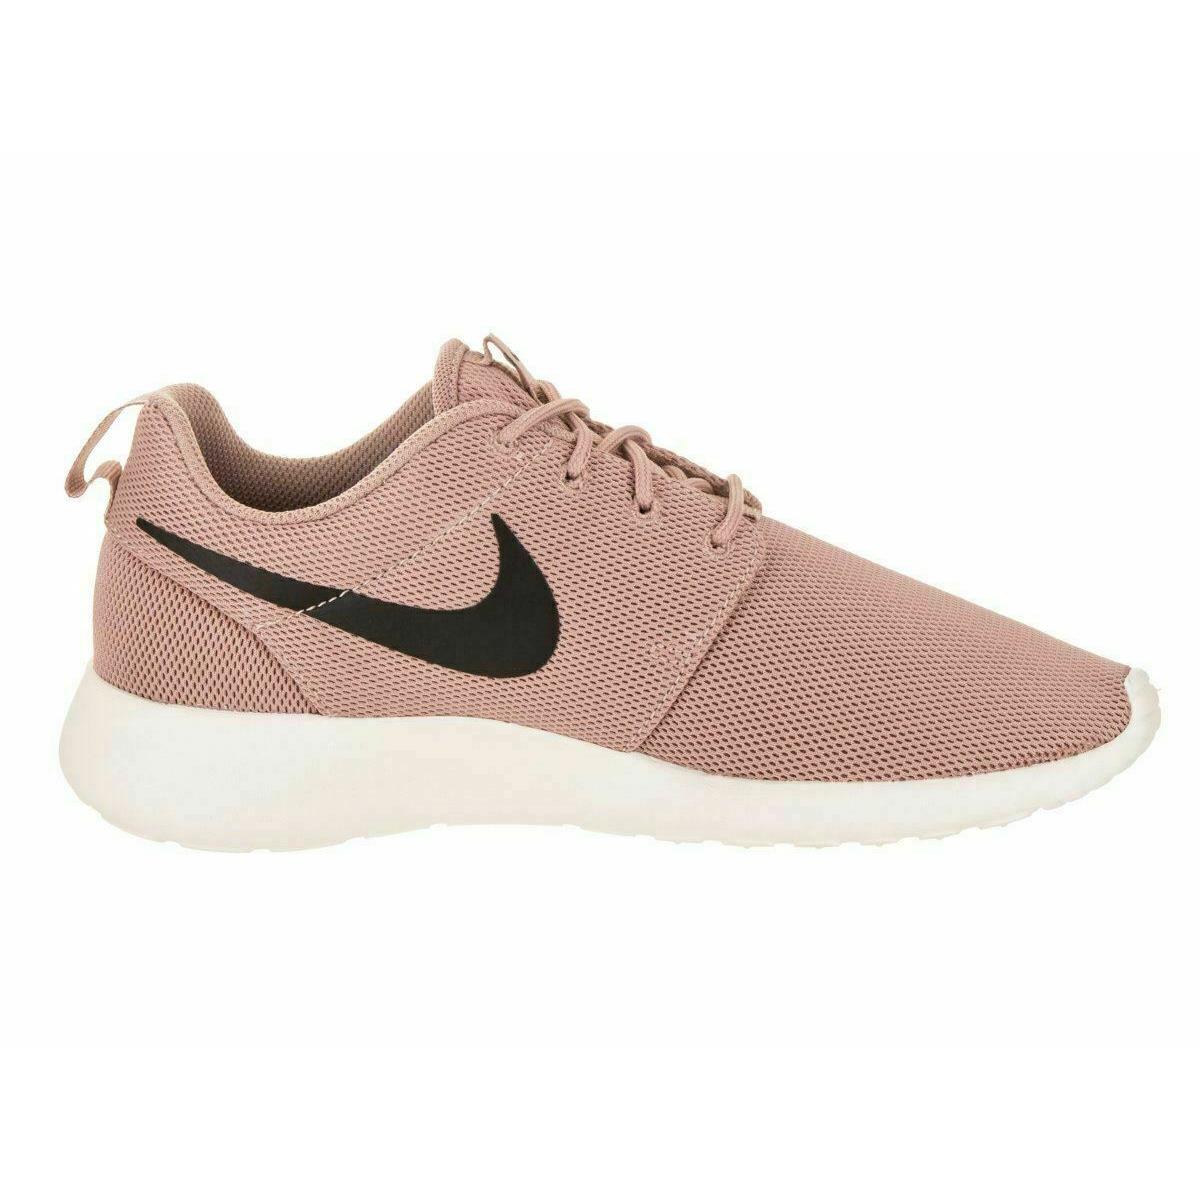 Nike shoes Roshe One - Brown & White 9